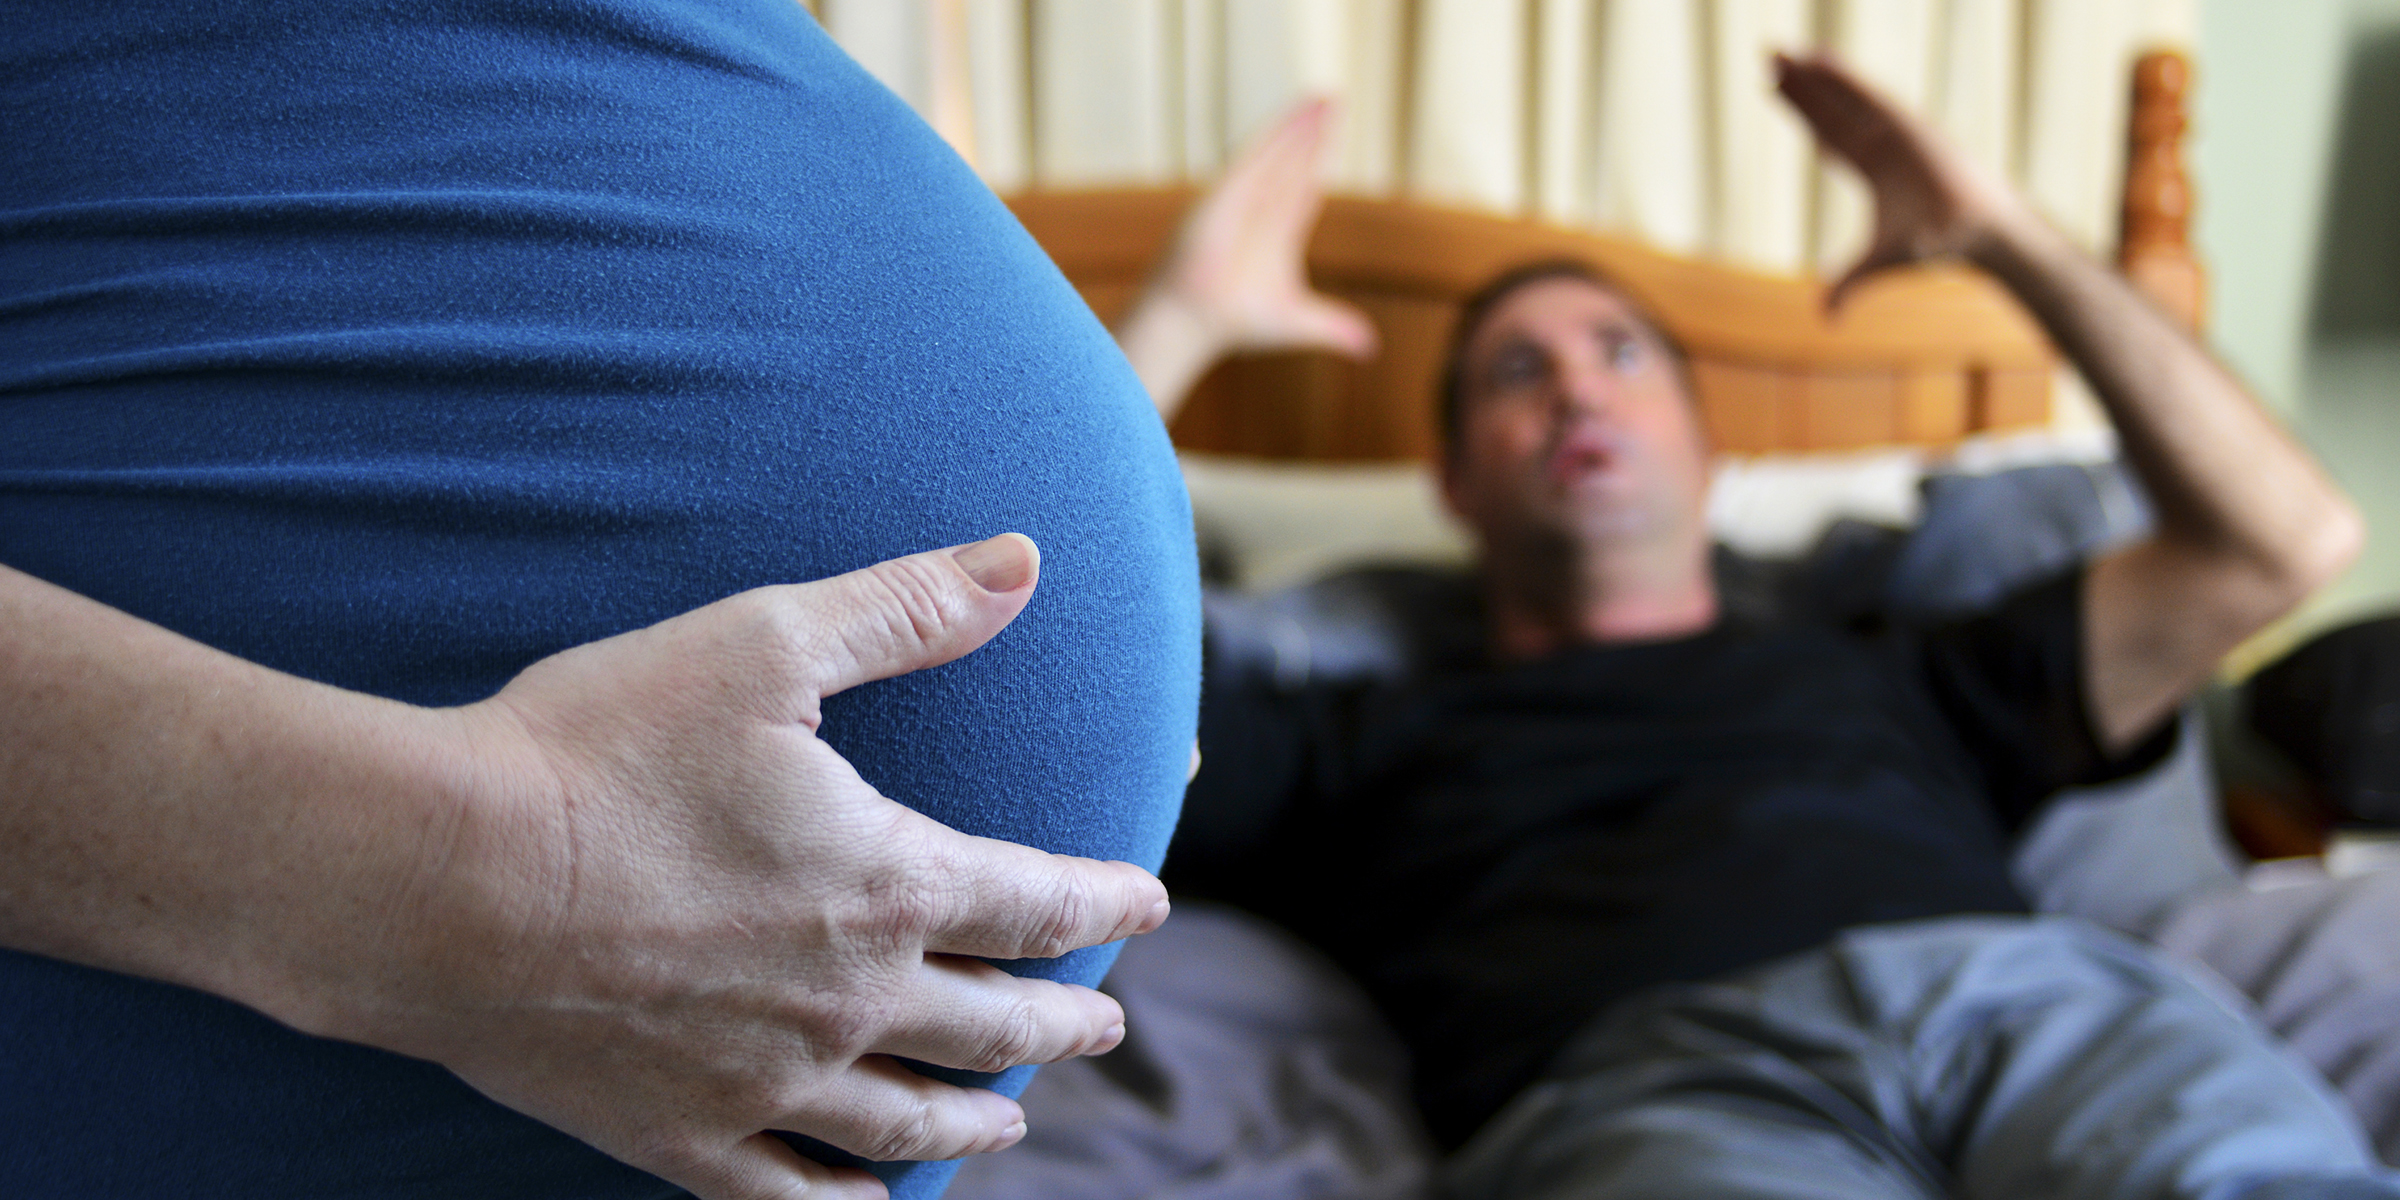 A pregnant woman with an angry man in the background | Source: Shutterstock